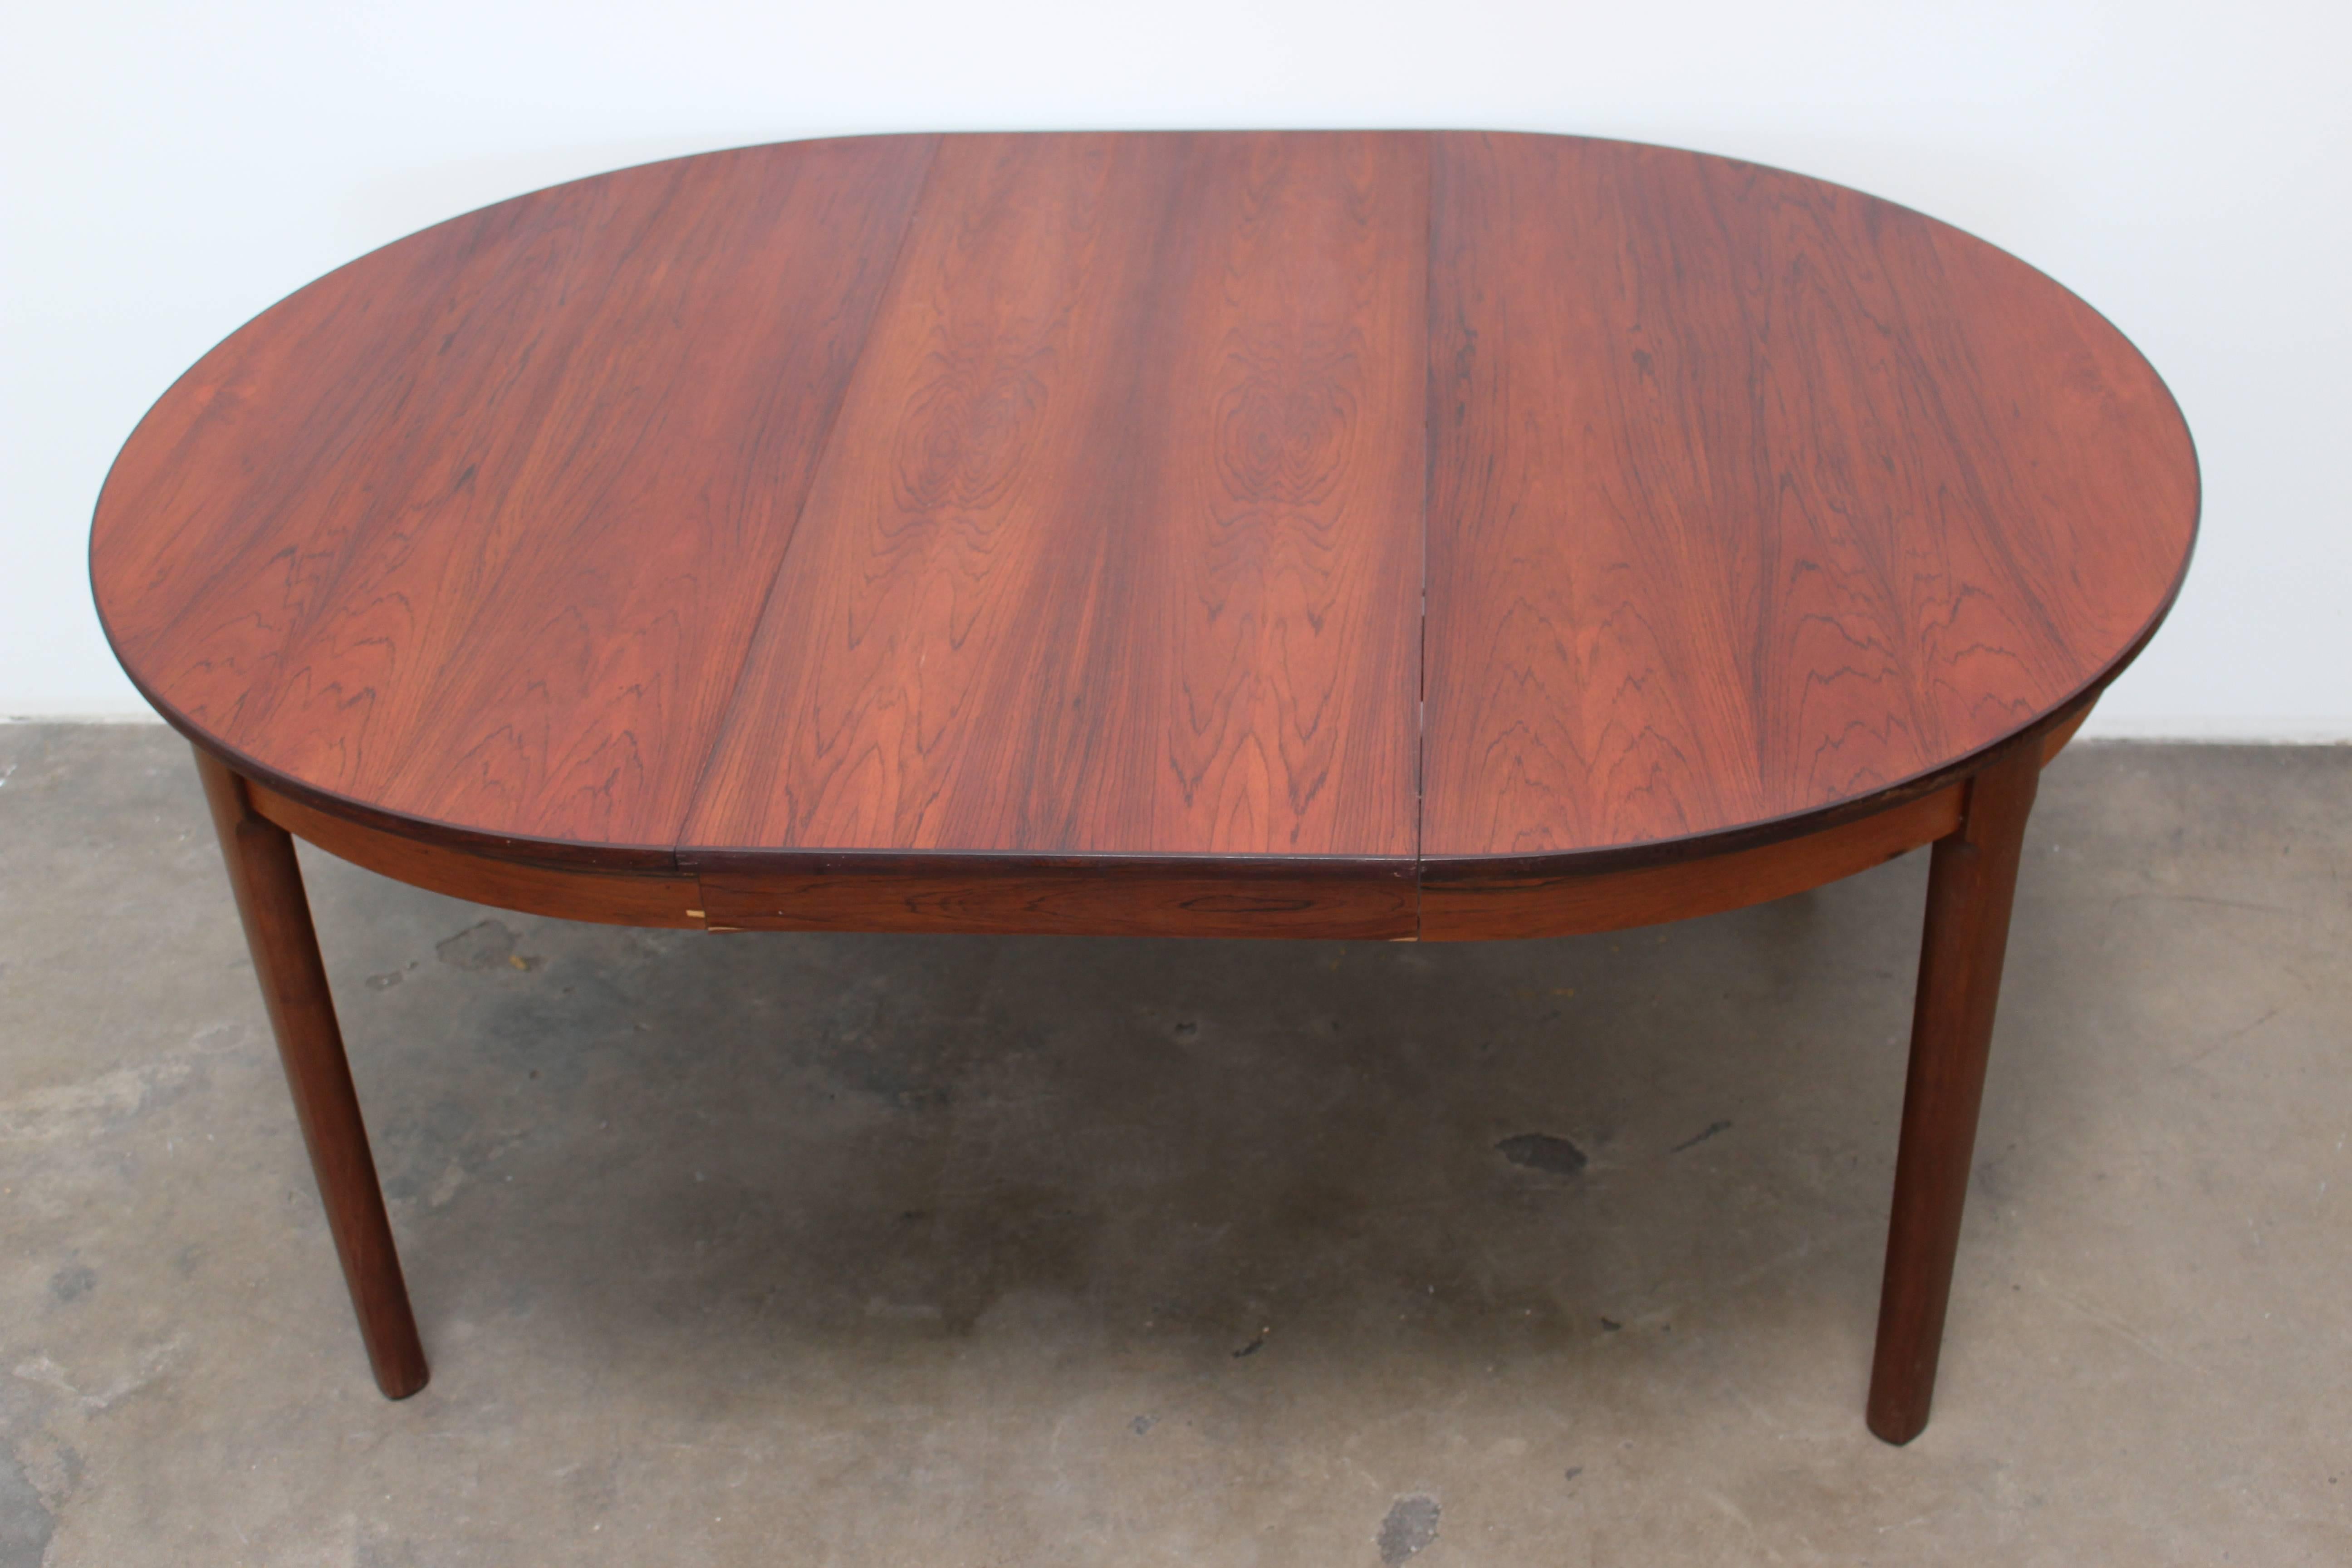 Round Rosewood Dining Table, Scandinavian Modern, circa 1950s For Sale 1